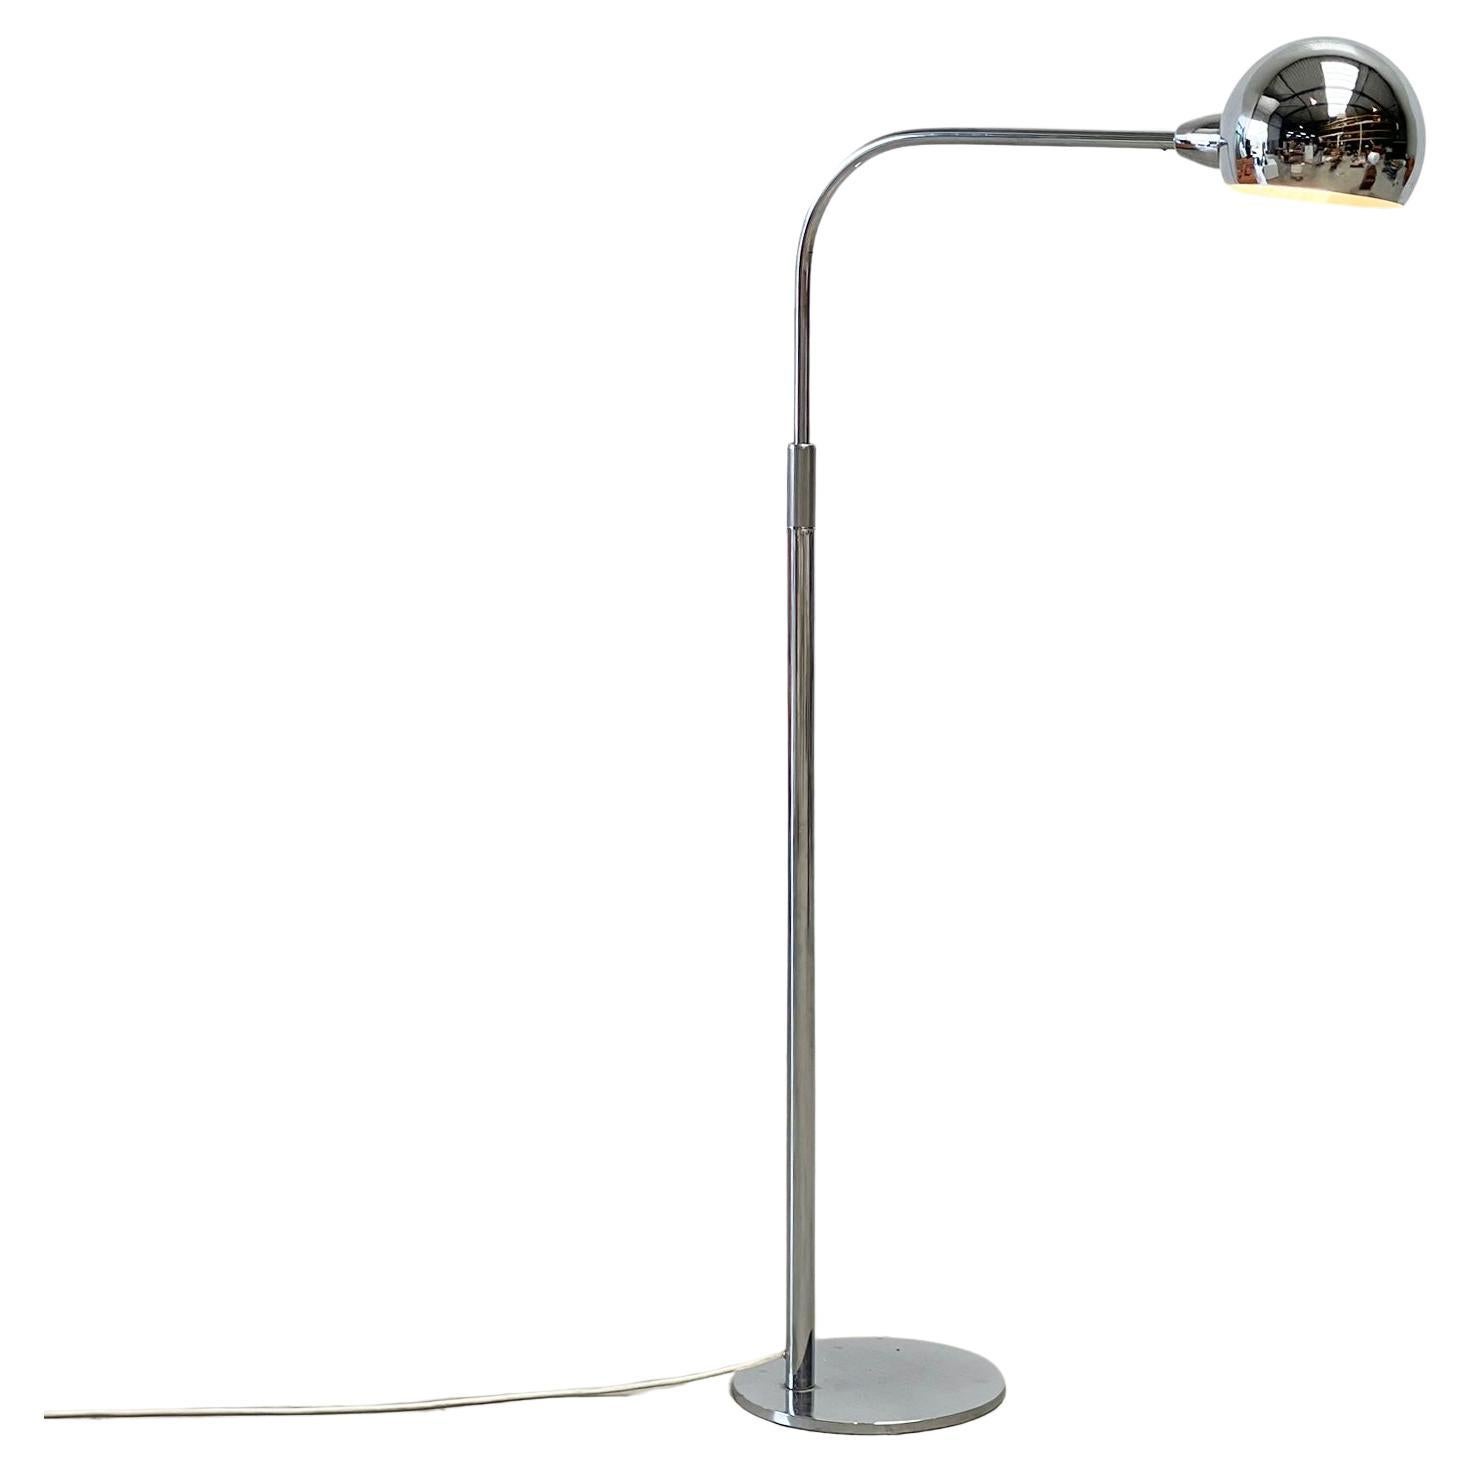 Sergio Asti for Candle adjustable floorlamp For Sale